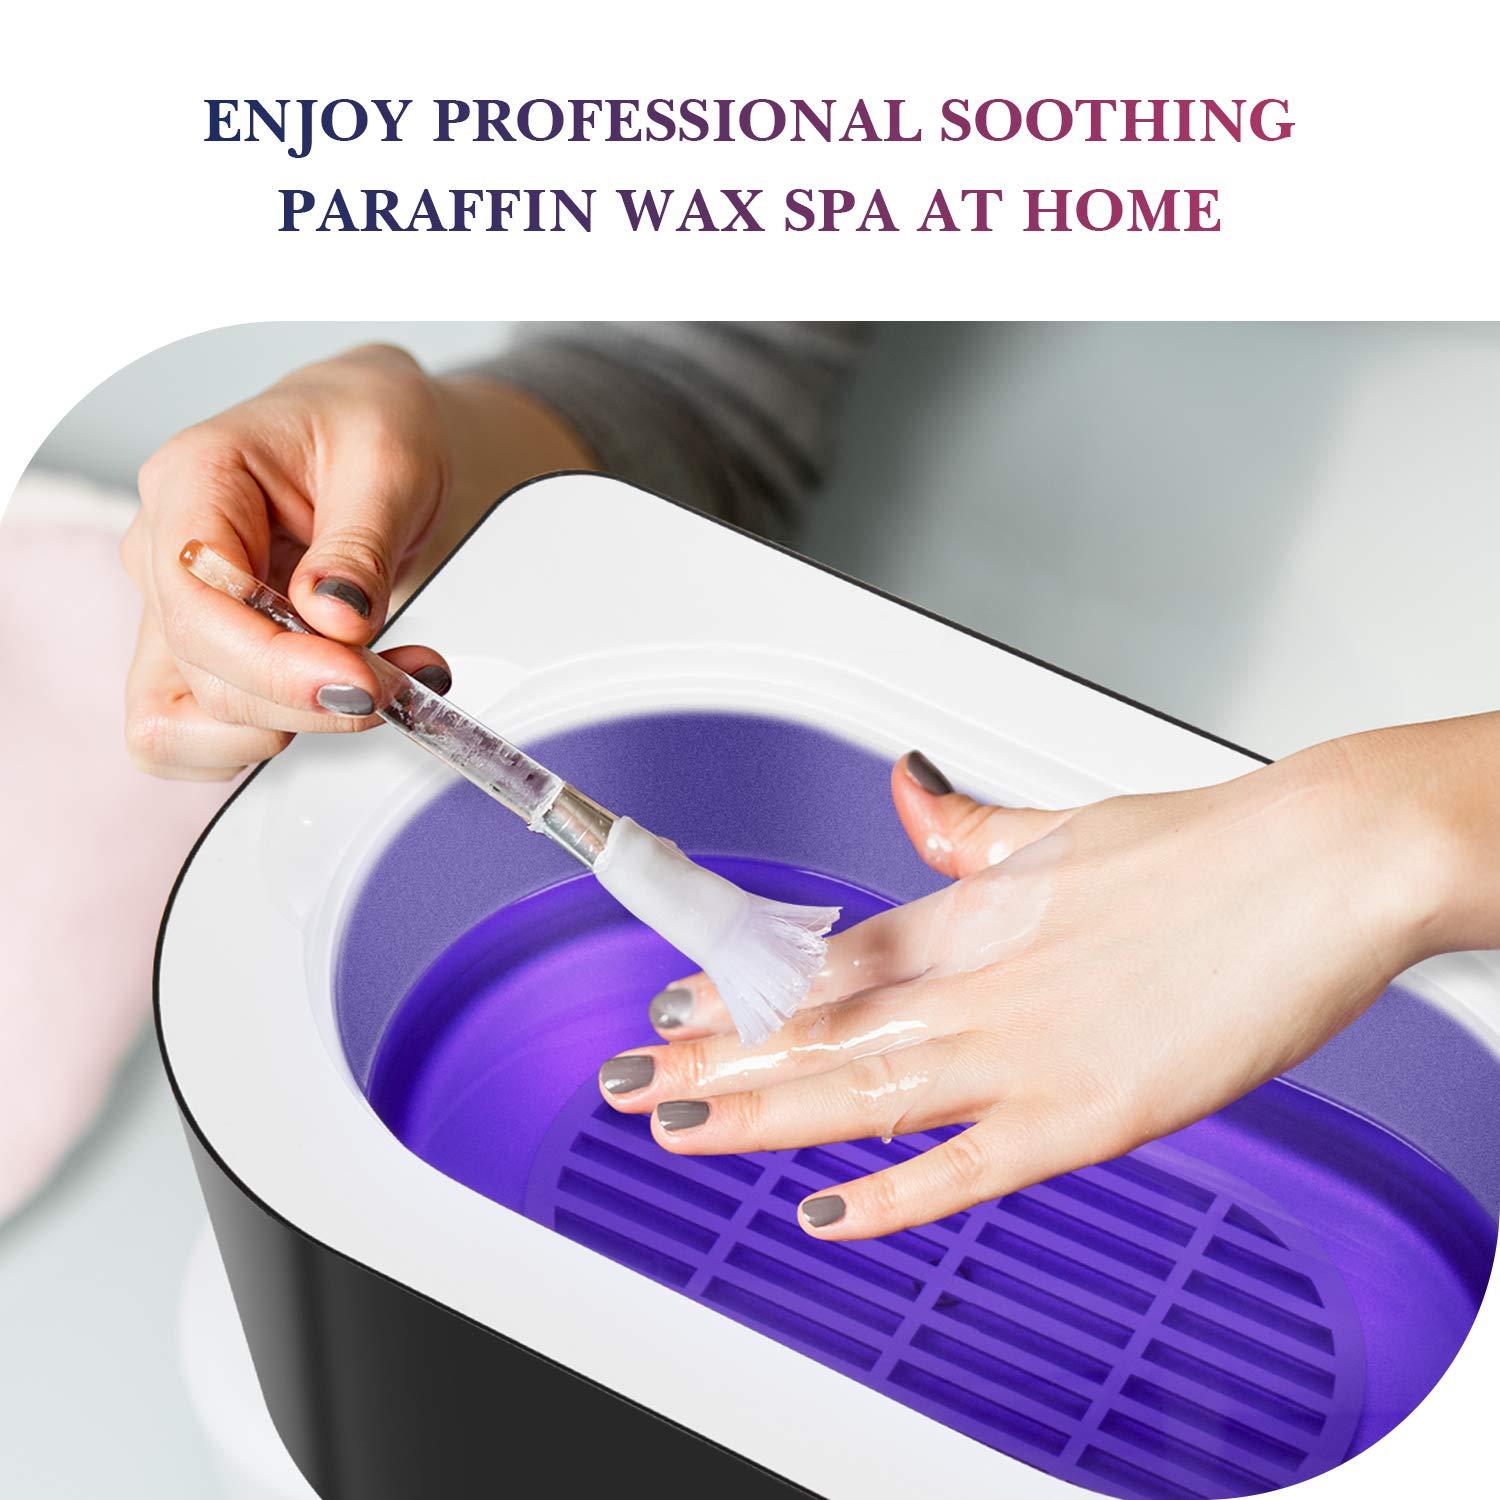 High-Quality Paraffin Wax for Spa Professionals